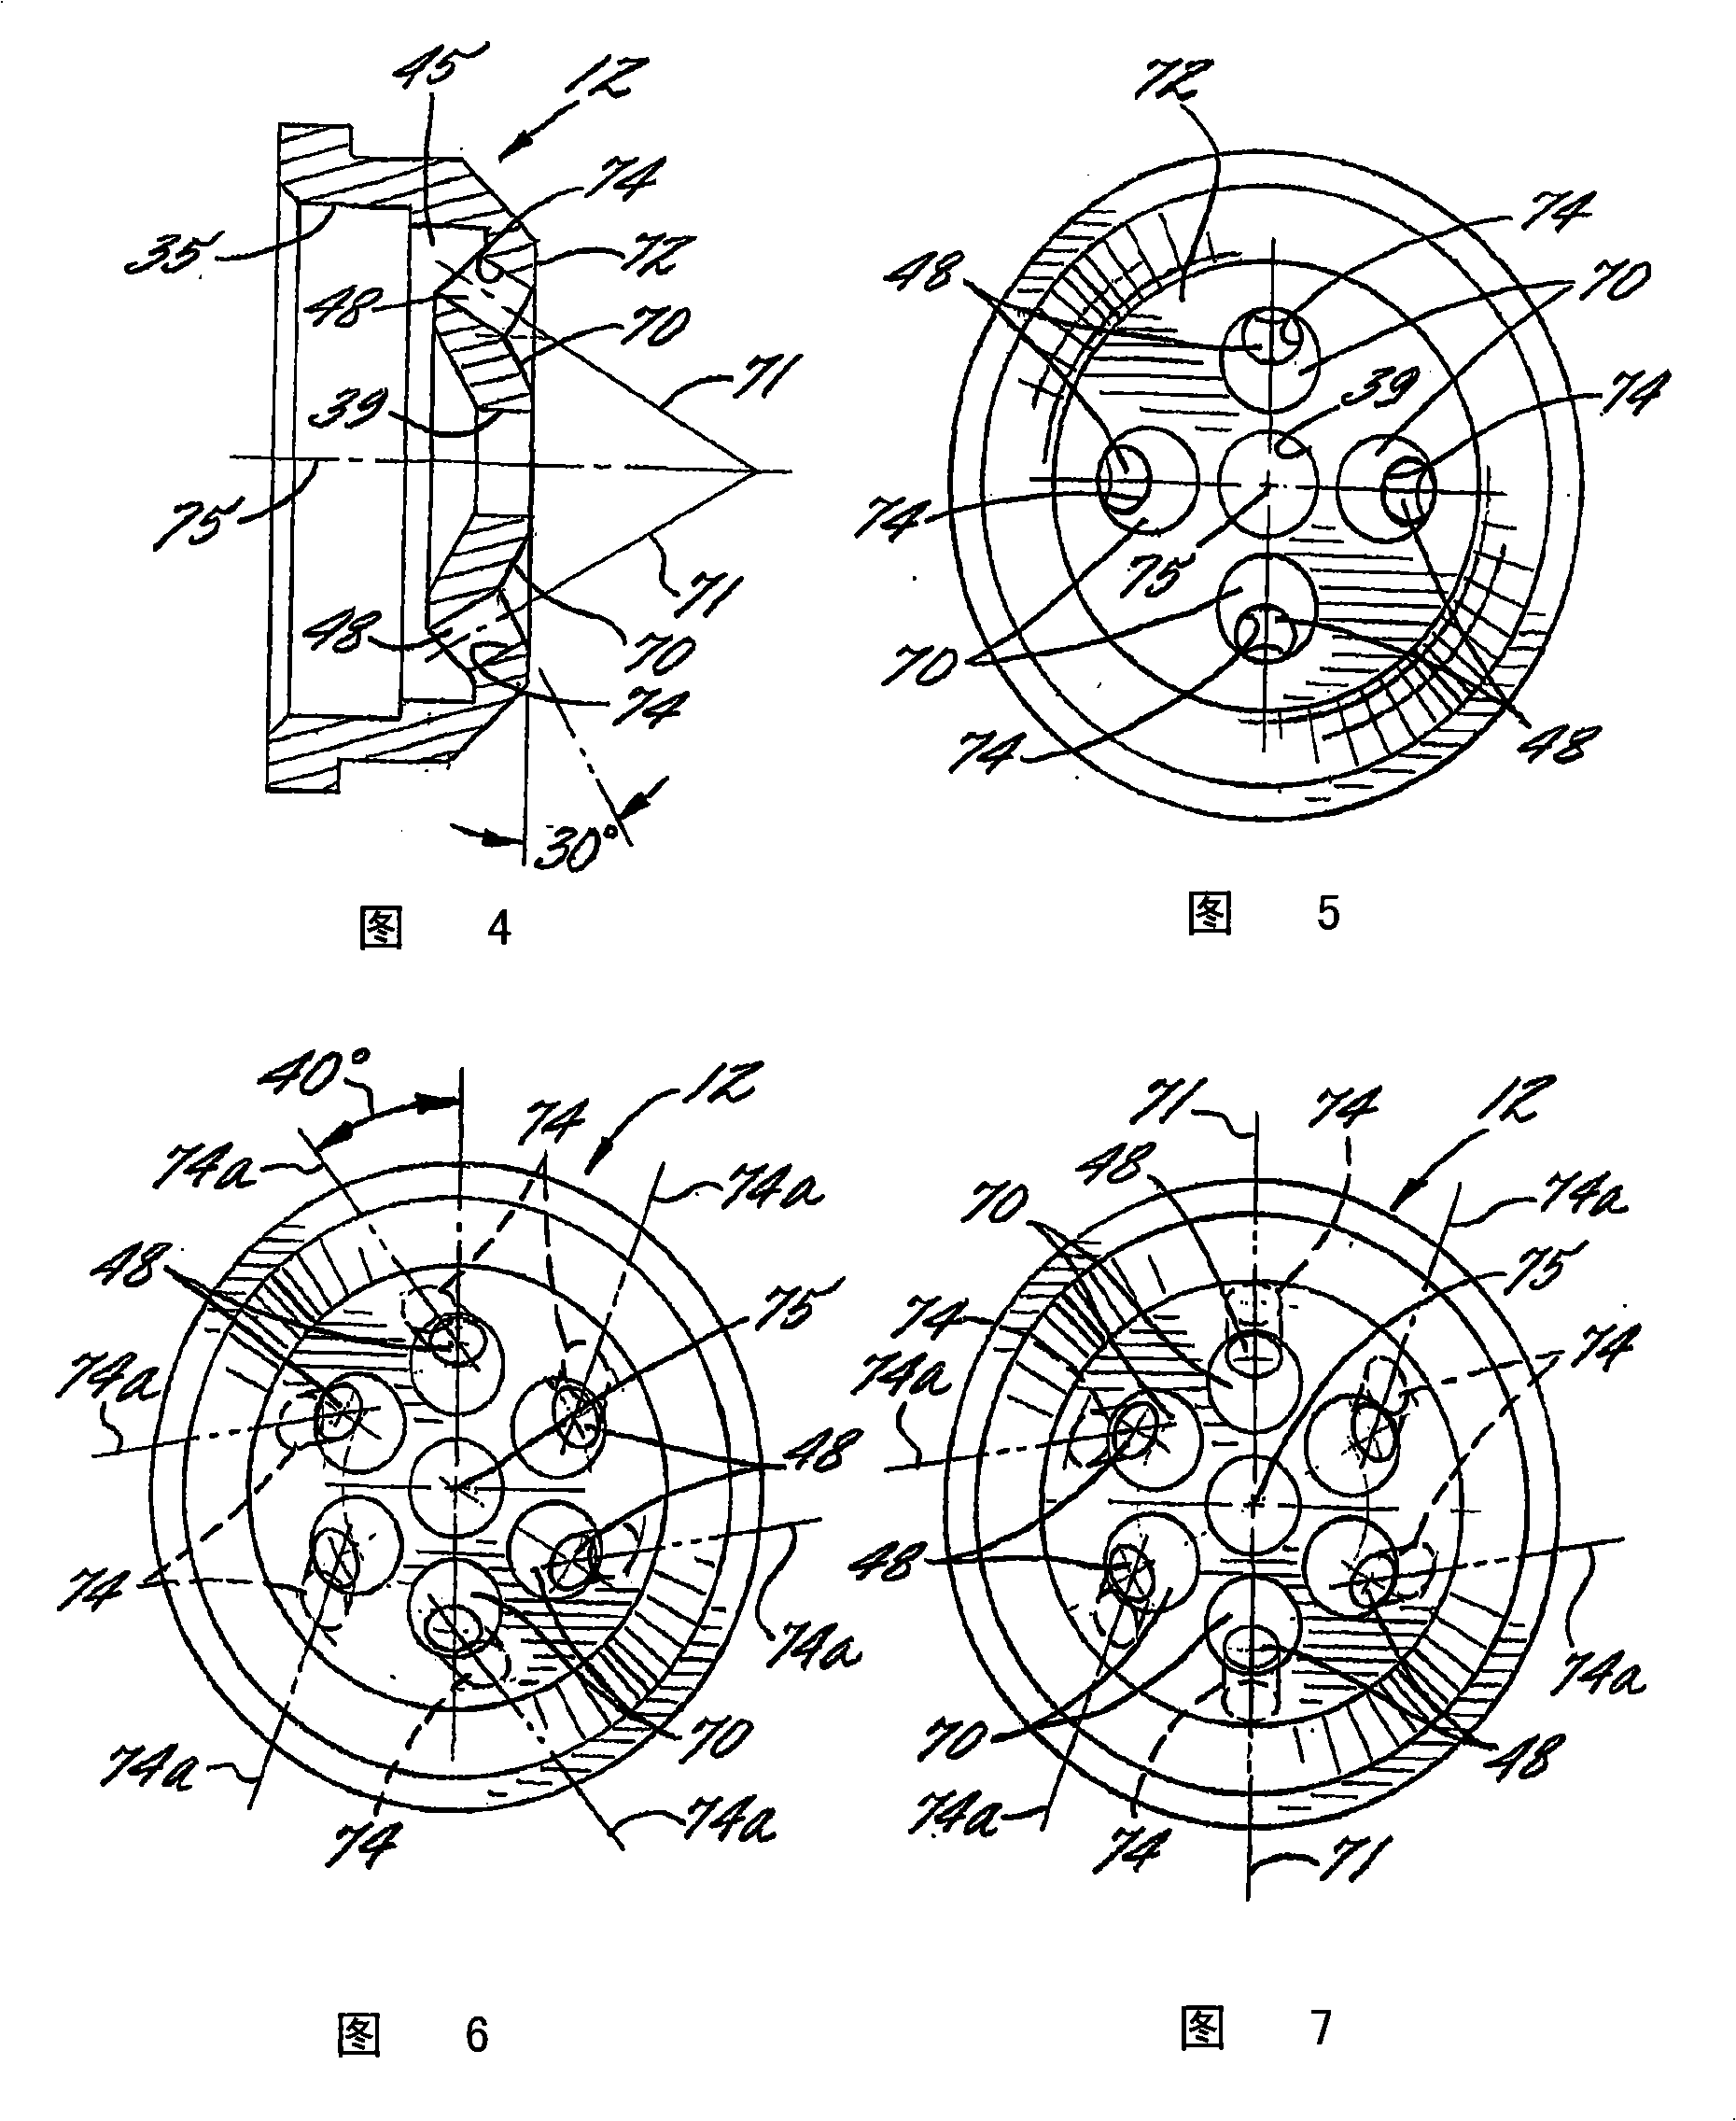 Improved external mix air atomizing spray nozzle assembly